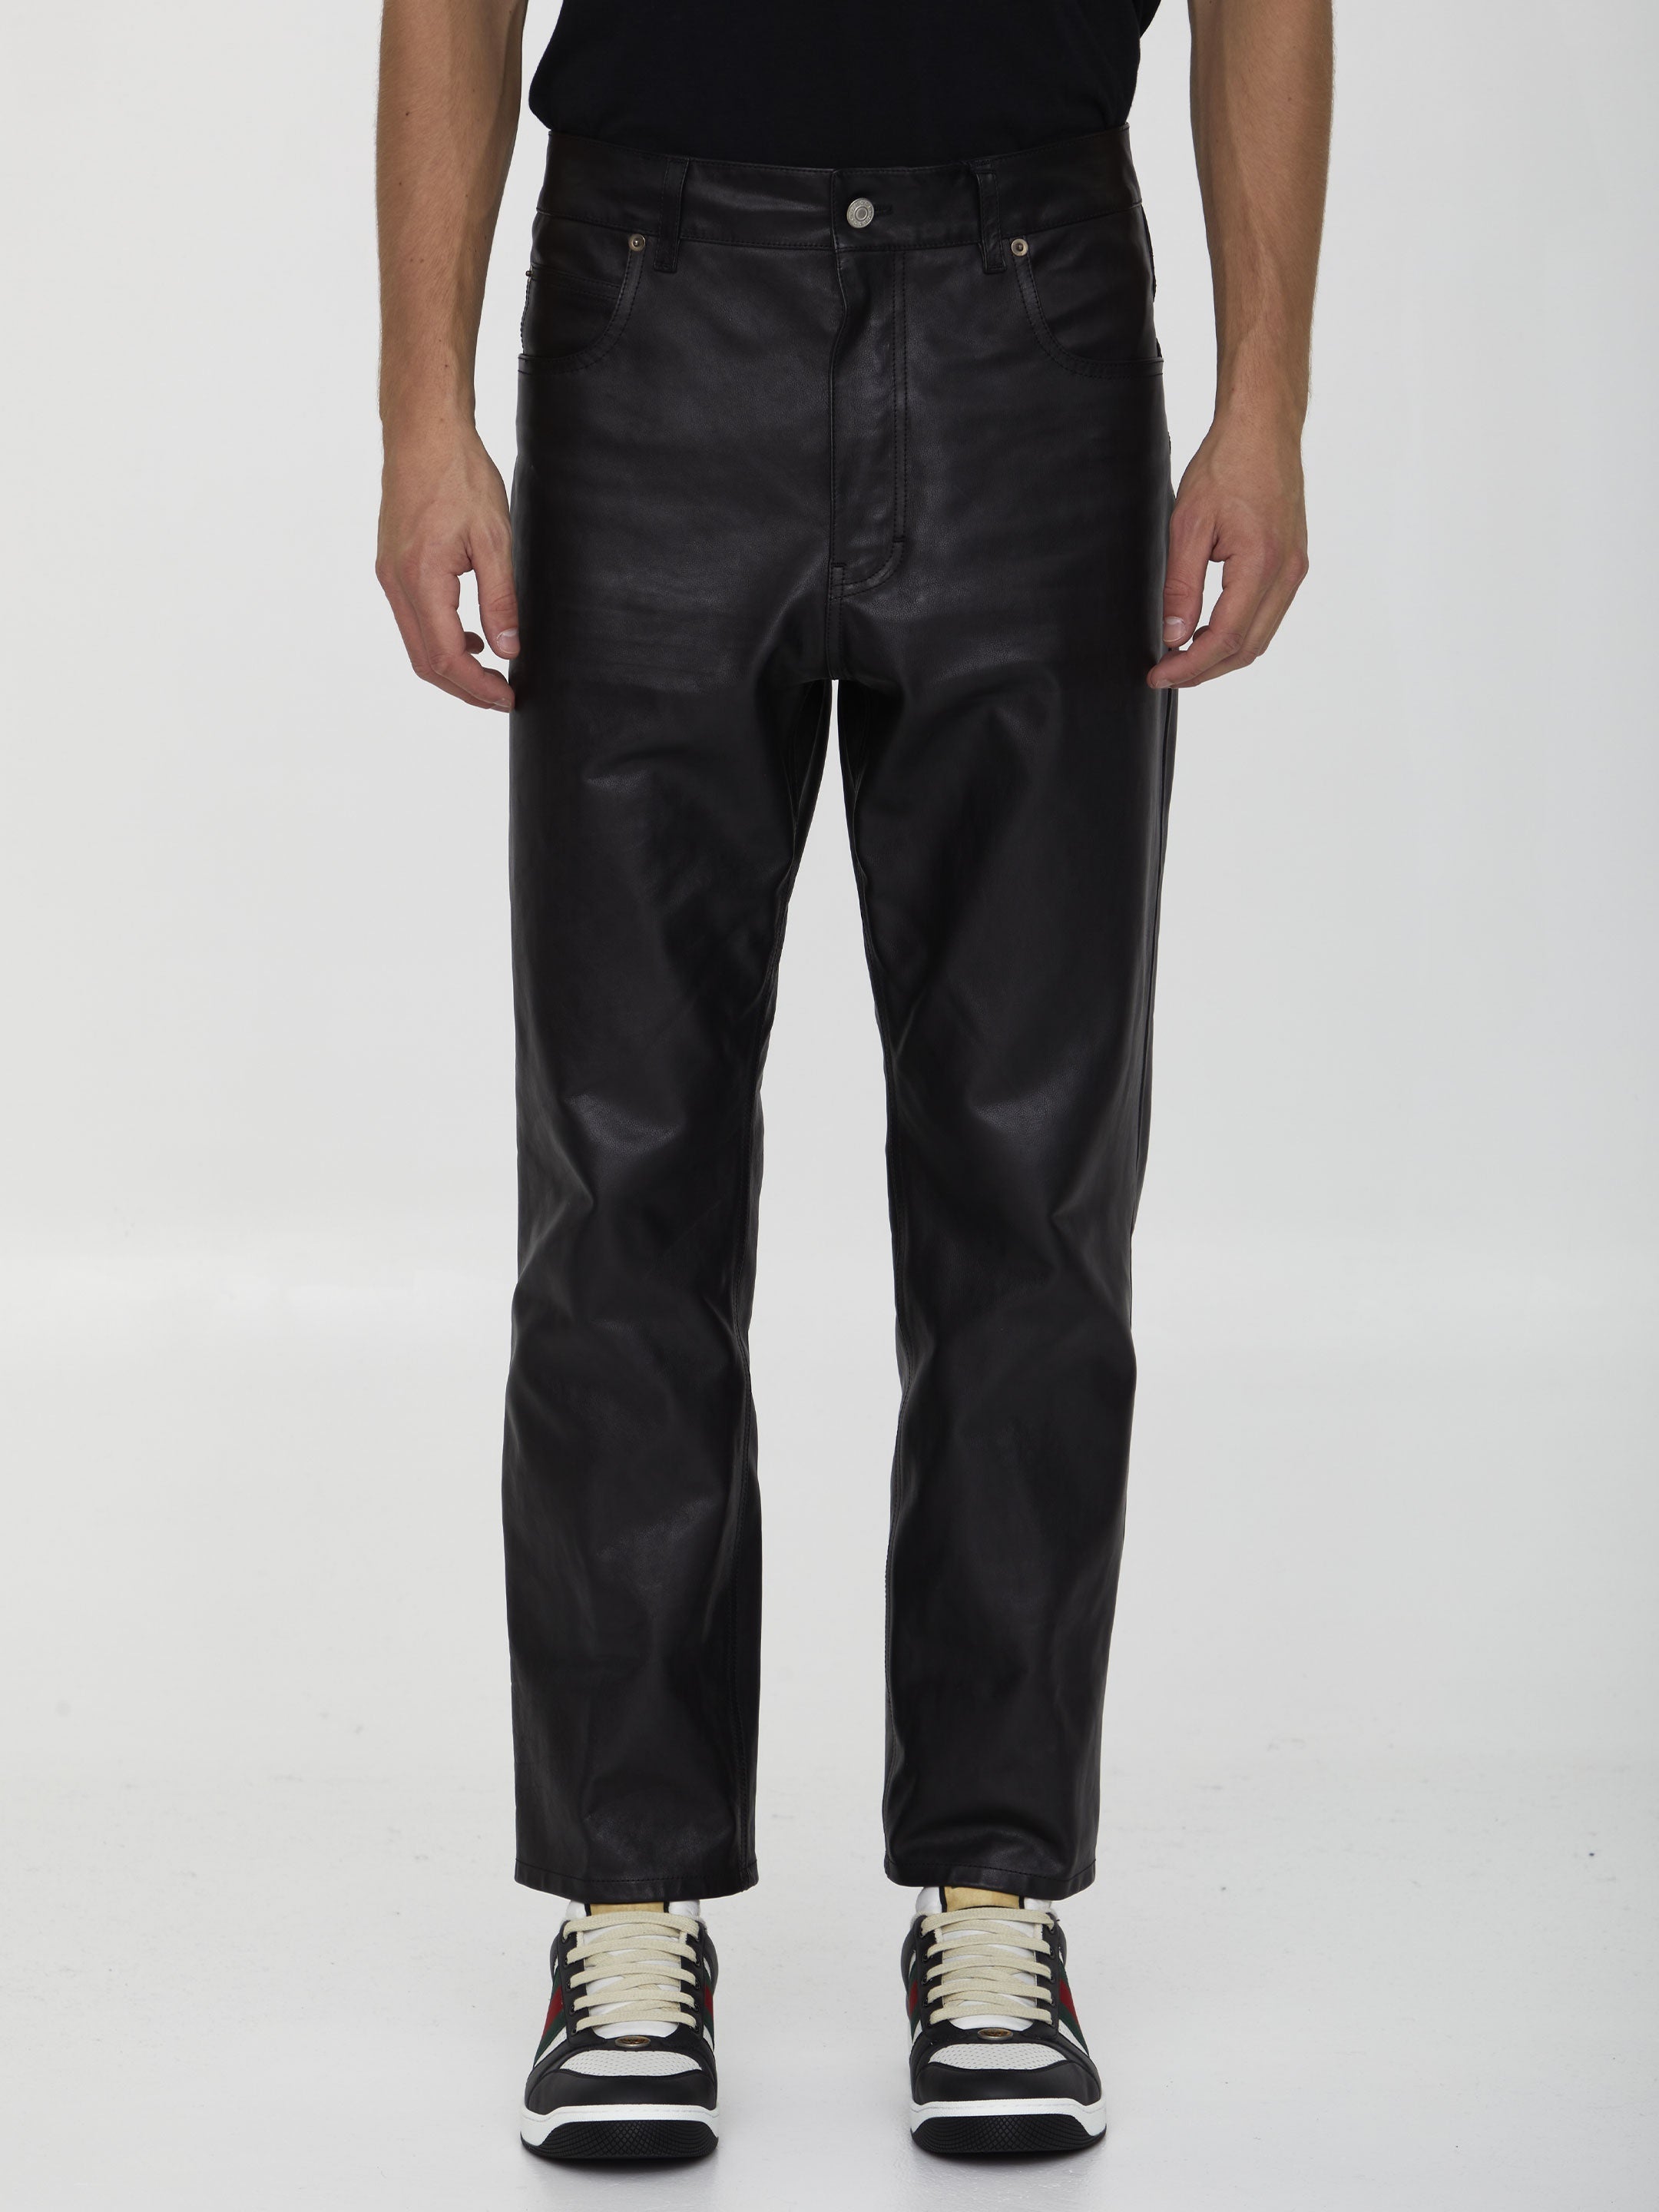 GUCCI-OUTLET-SALE-Shiny-leather-trousers-Hosen-48-BLACK-ARCHIVE-COLLECTION.jpg